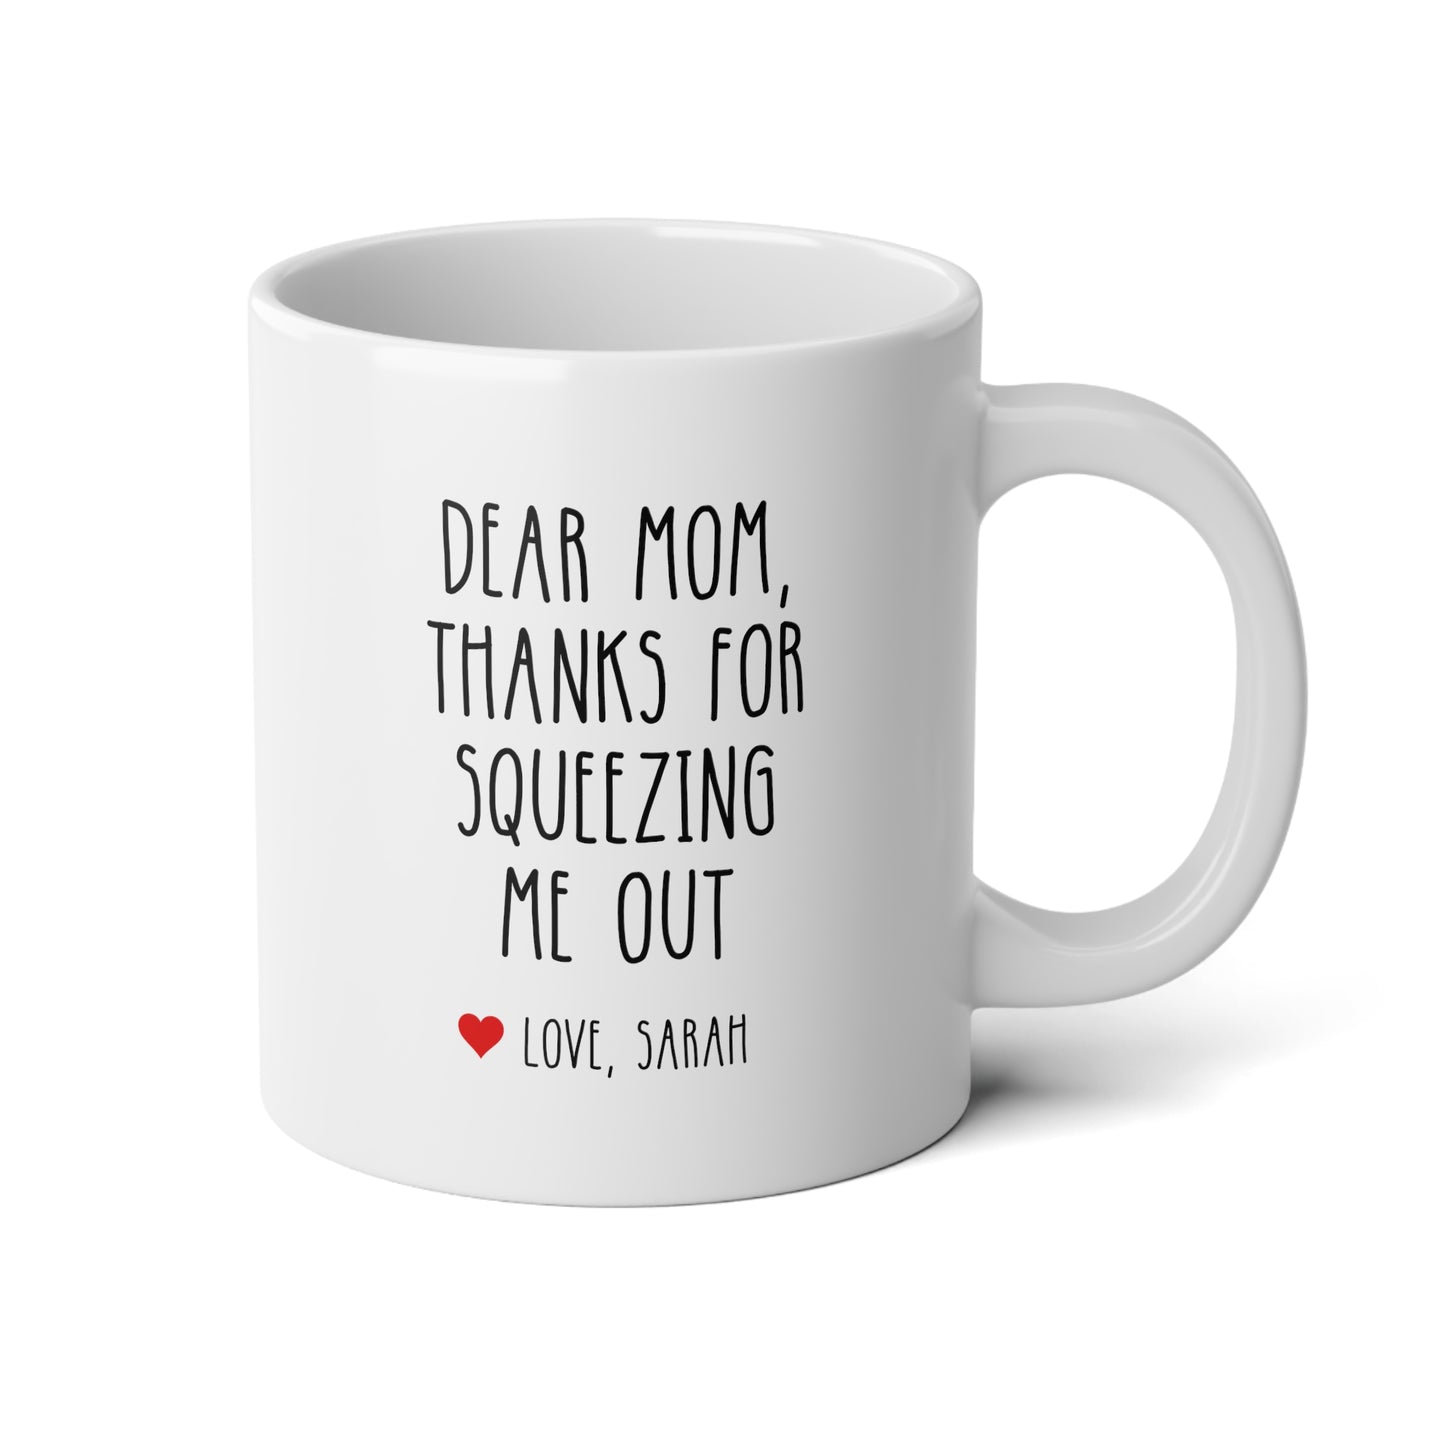 Dear Mom Thanks For Squeezing Me Out 20oz white funny large coffee mug gift for mother's day custom name personalize love novelty birthday appreciation gag waveywares wavey wares wavywares wavy wares